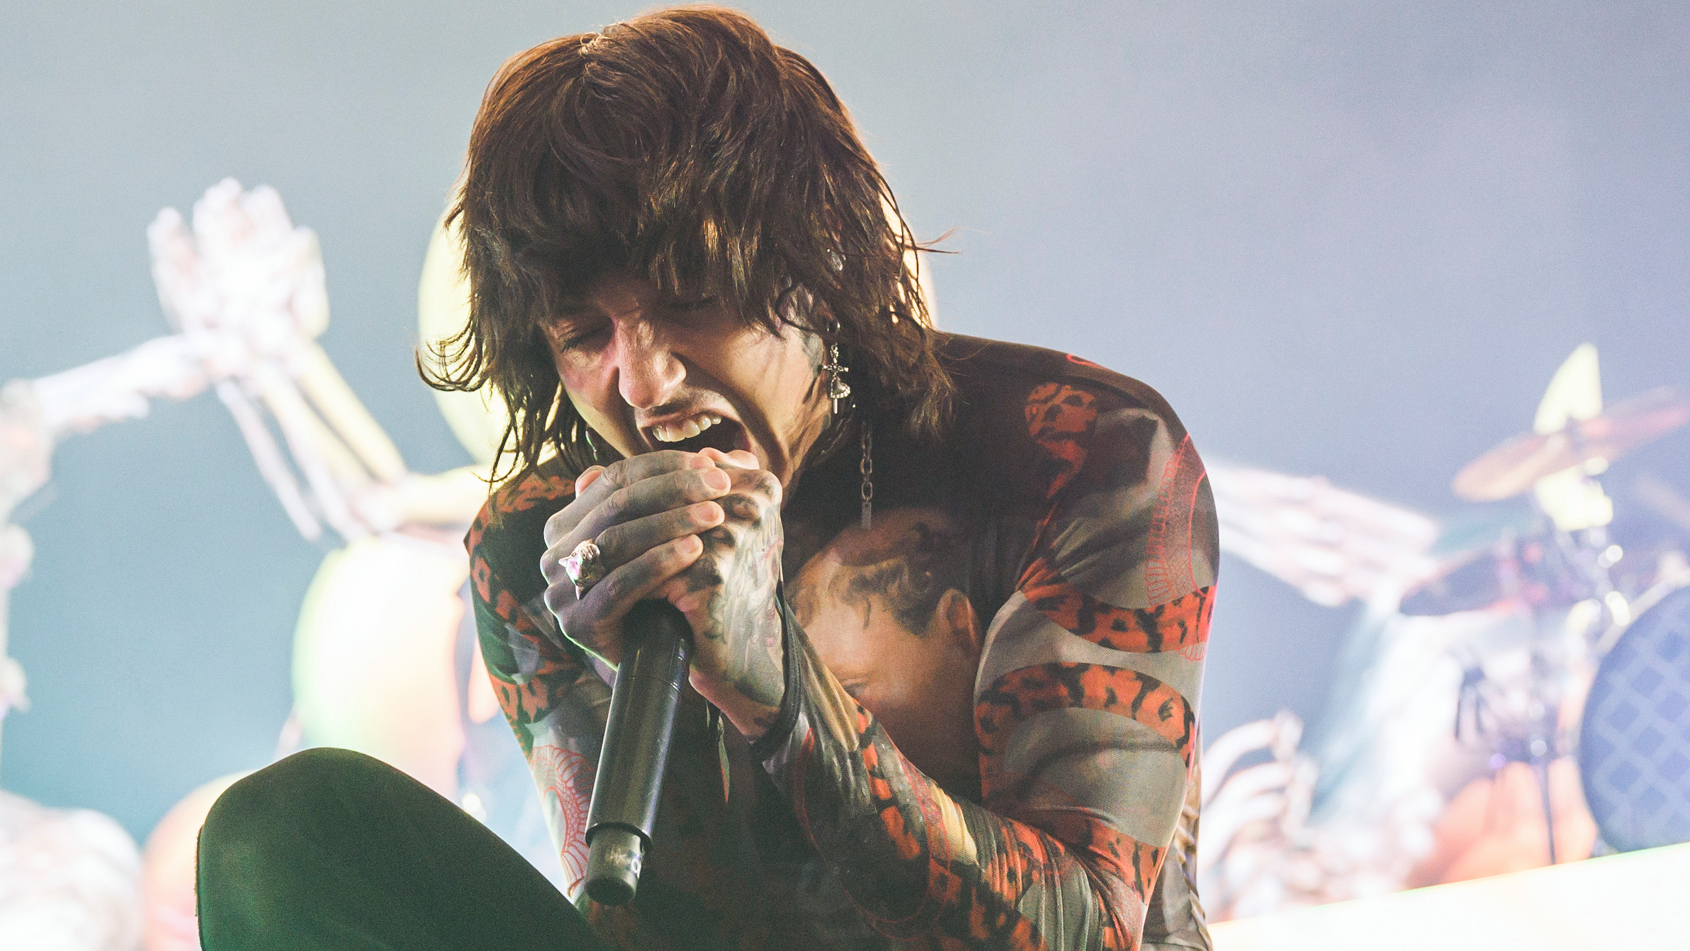 Bring Me The Horizon's Oli Sykes: “We want to be…